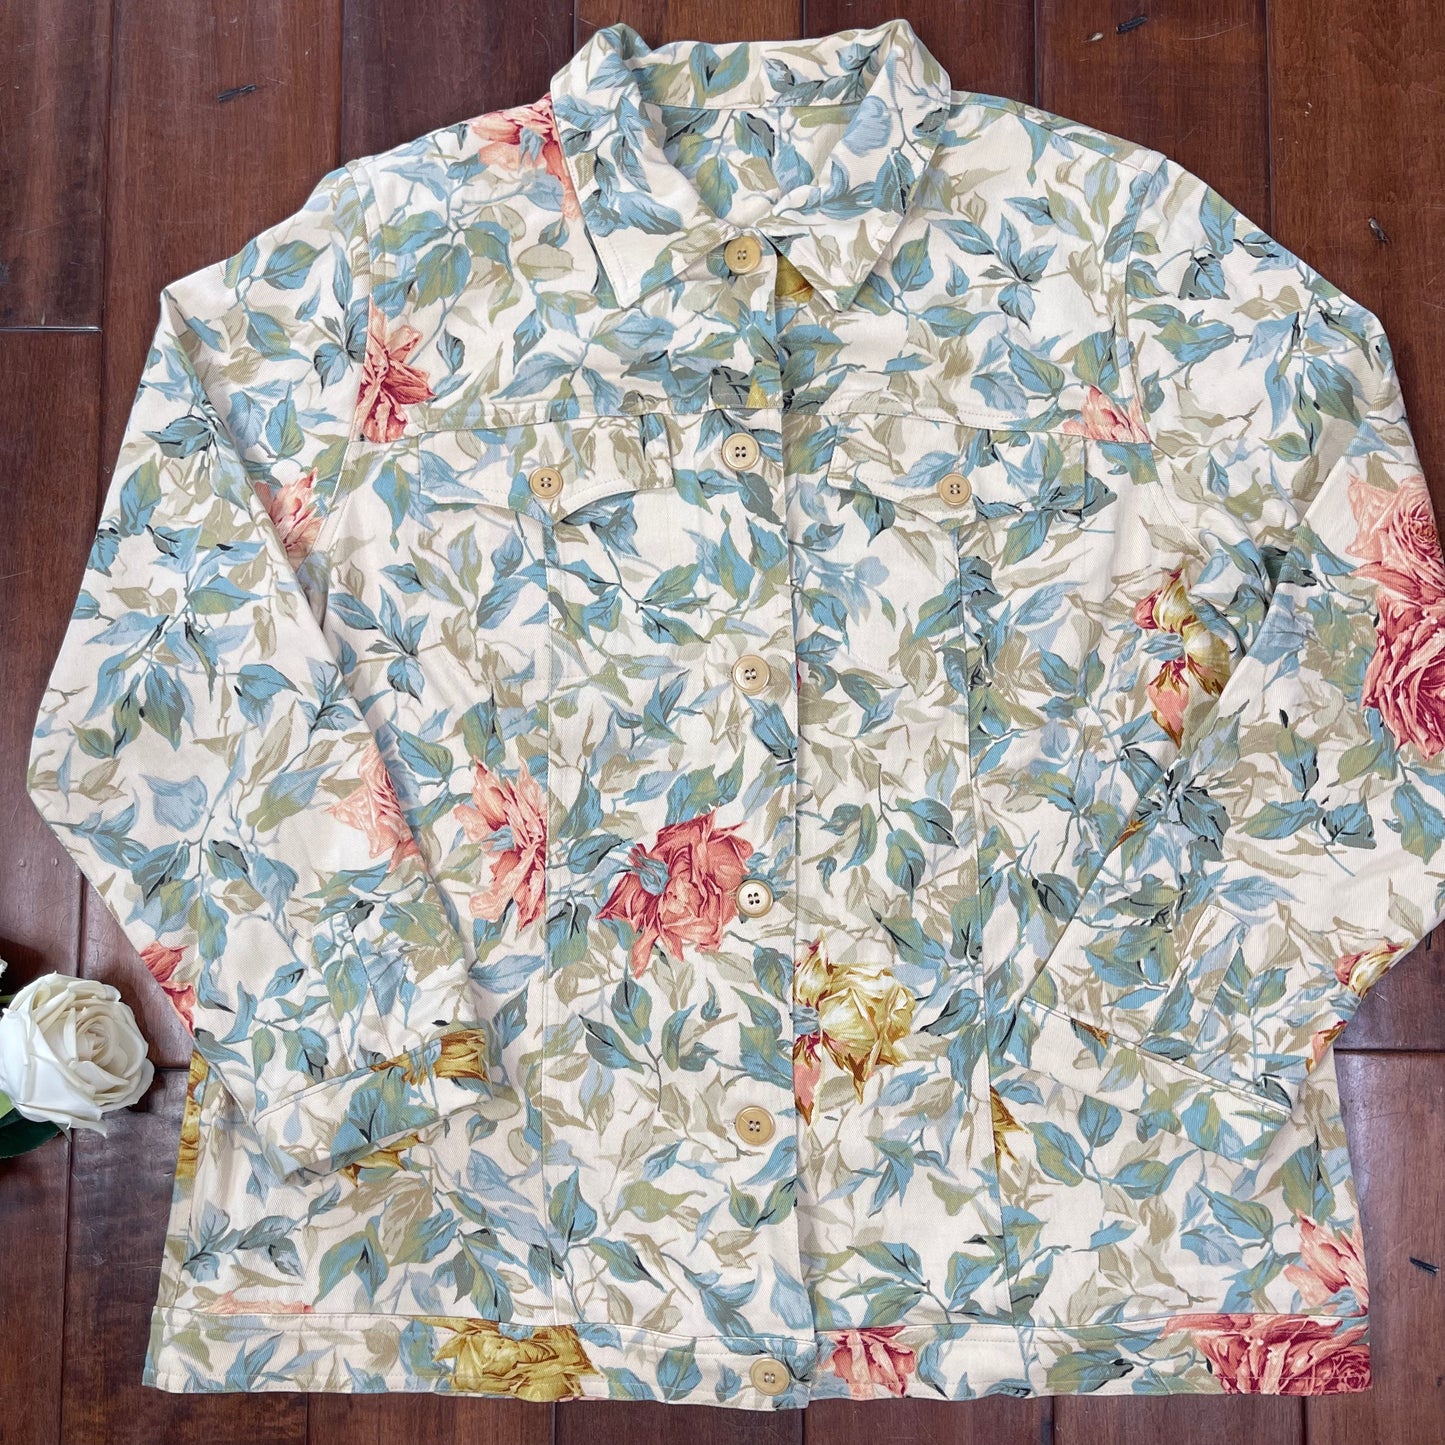 THRIFTED FLORAL BUTTON-UP JACKET